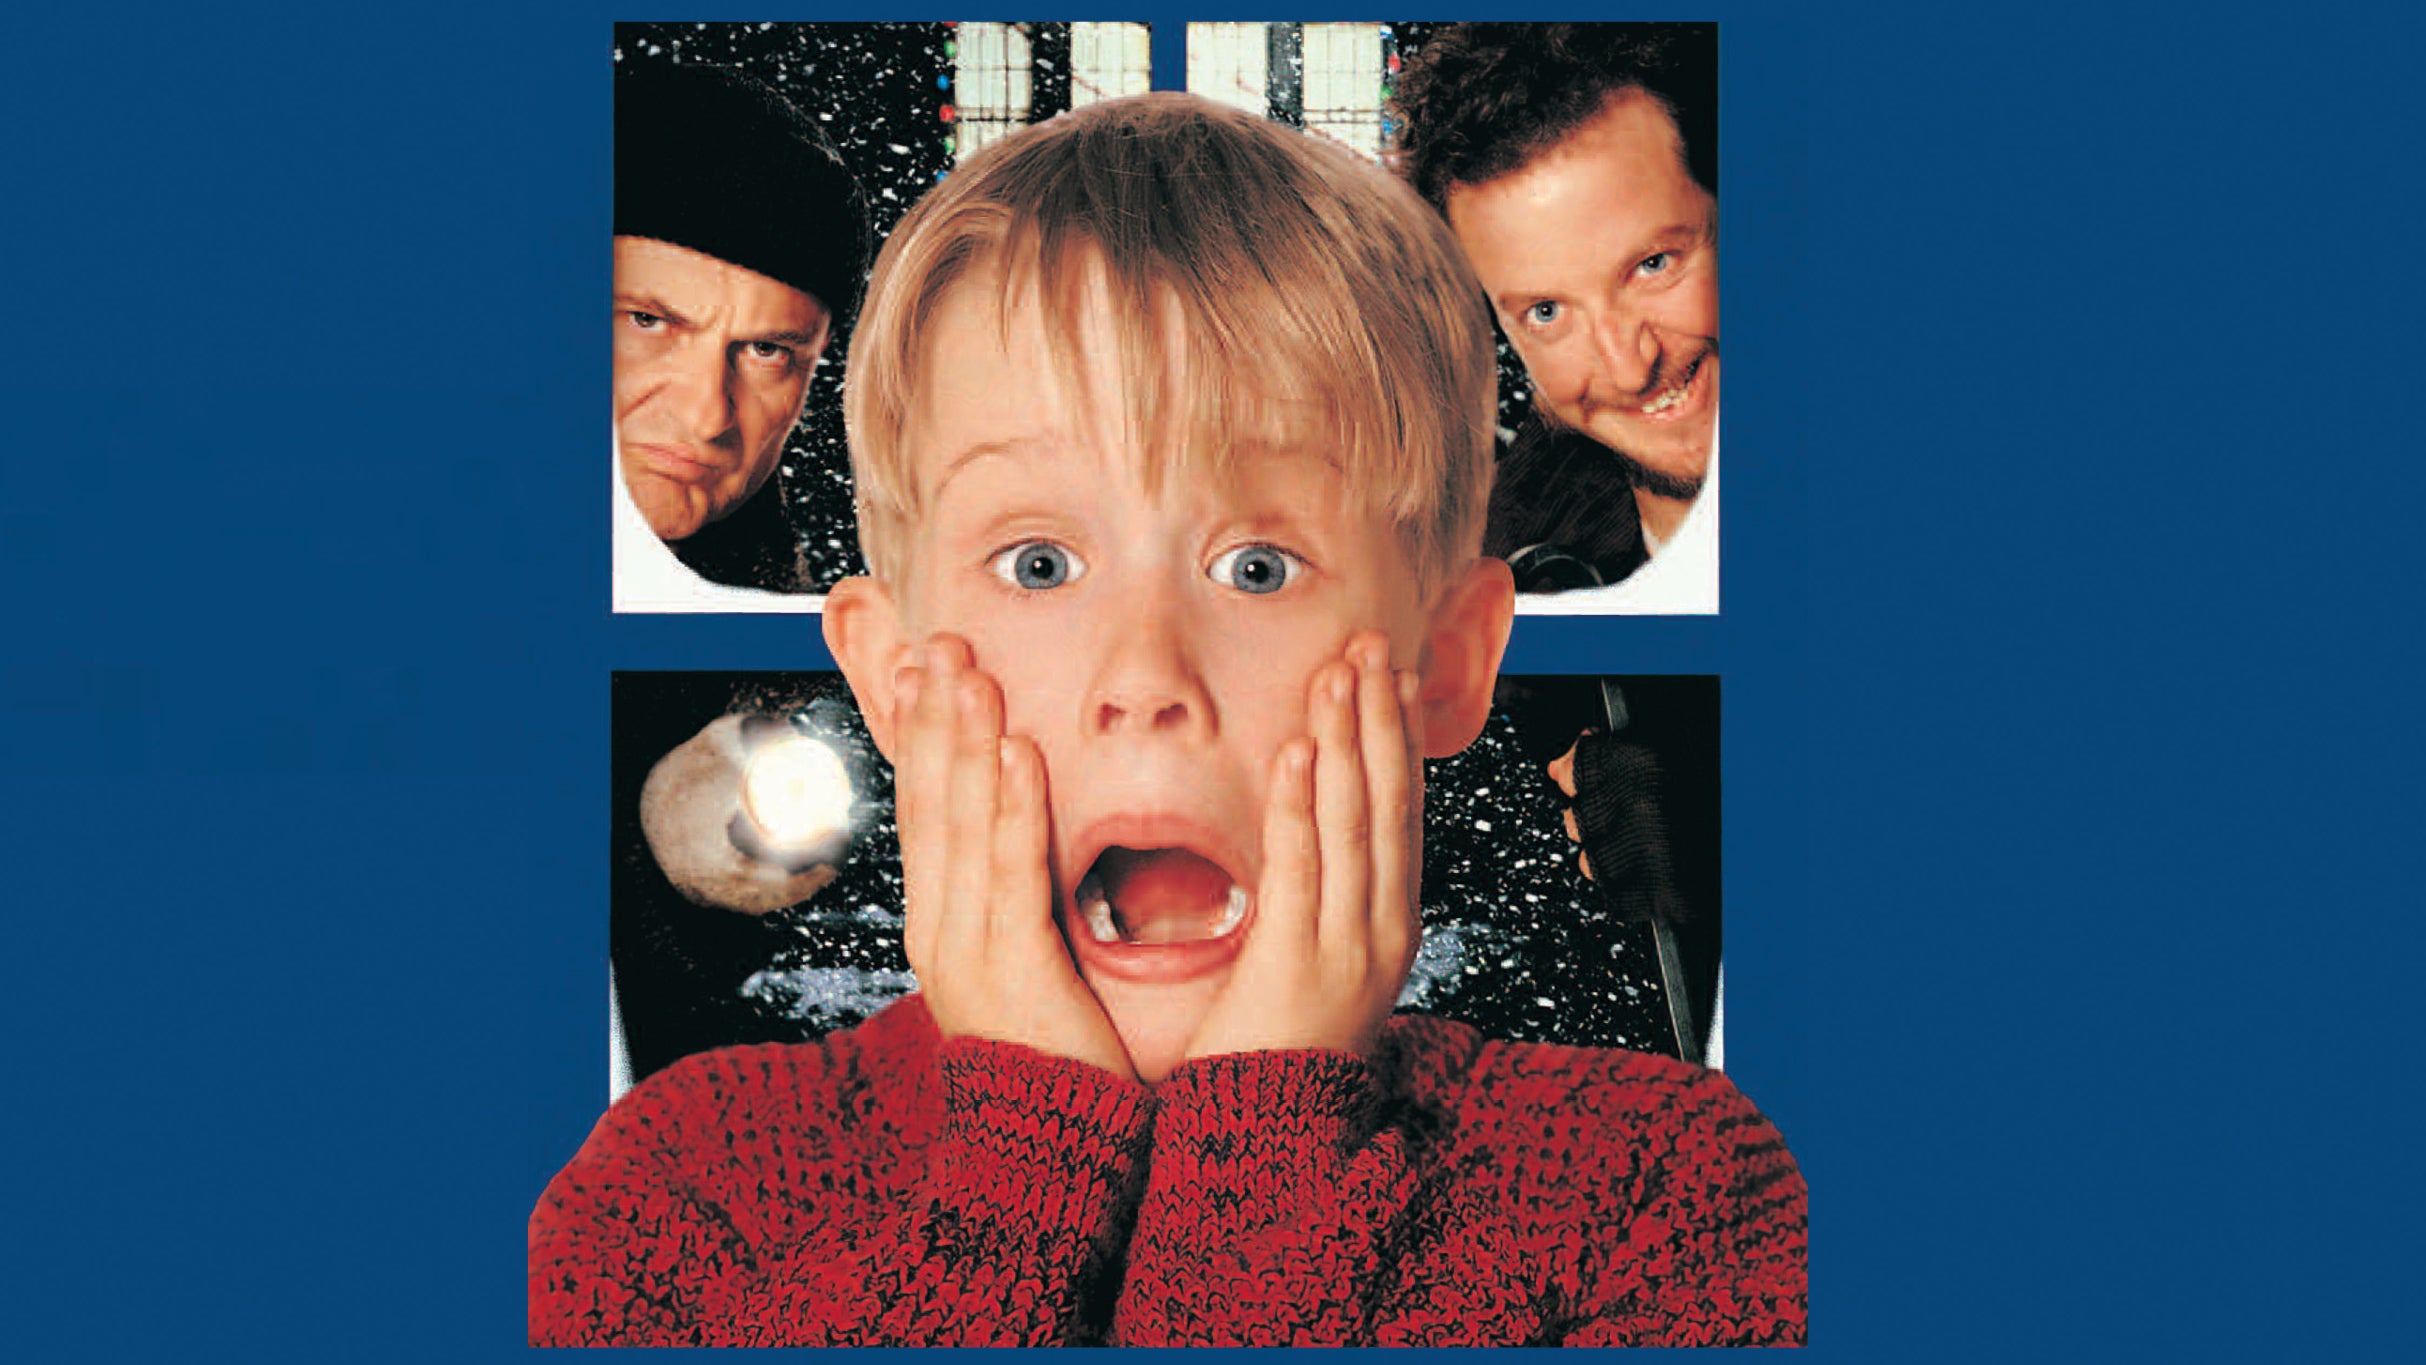 Home Alone in Concert in Liverpool promo photo for Exclusive presale offer code